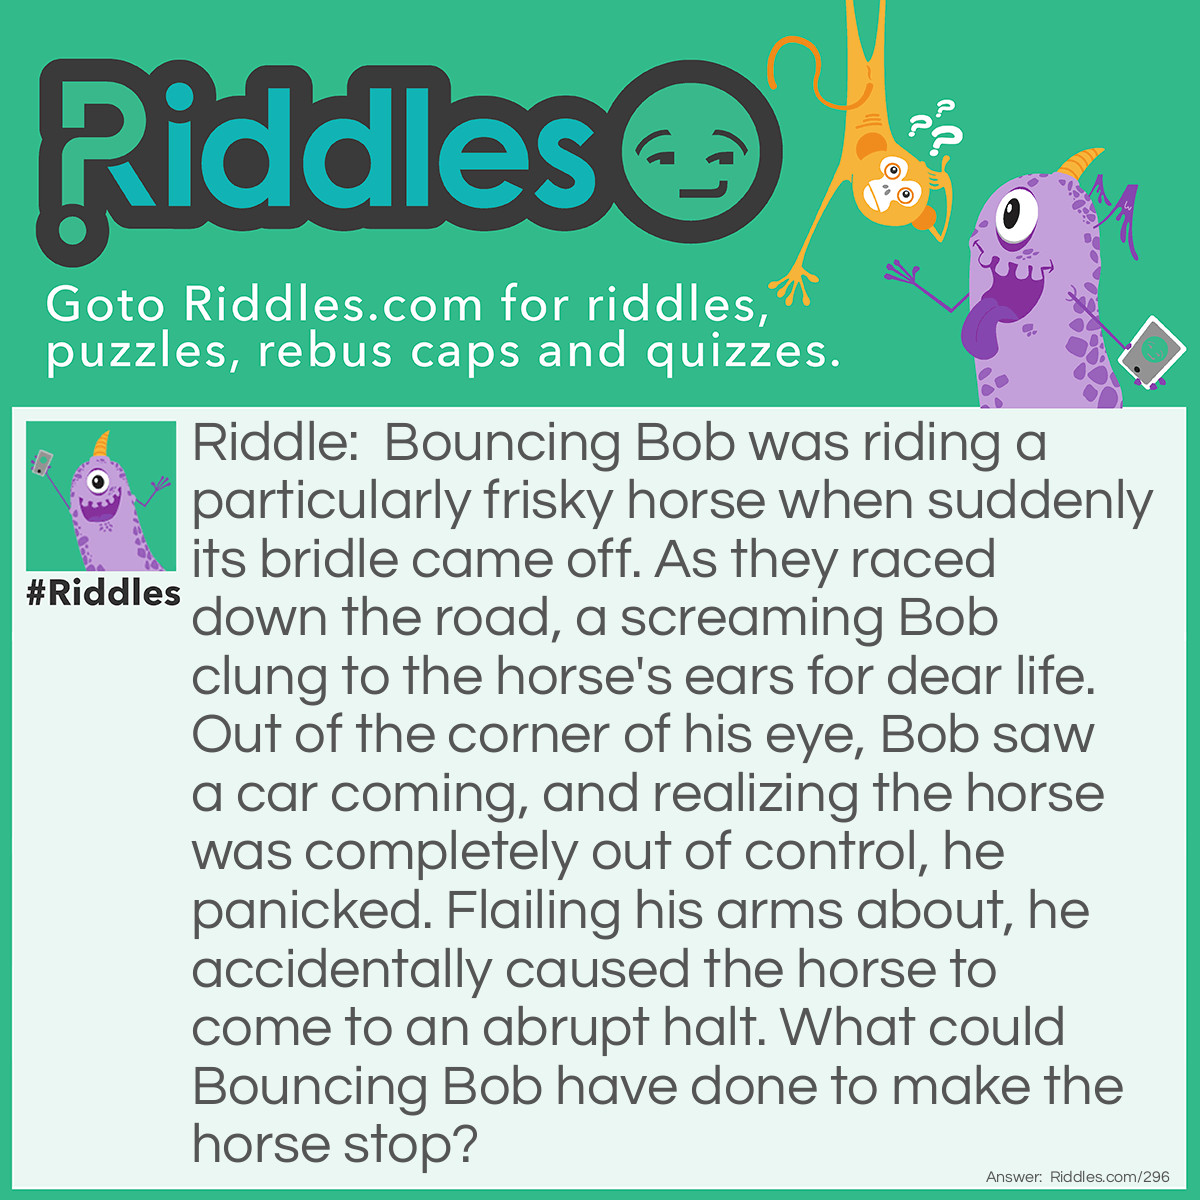 Riddle: Bouncing Bob was riding a particularly frisky horse when suddenly its bridle came off. As they raced down the road, a screaming Bob clung to the horse's ears for dear life. Out of the corner of his eye, Bob saw a car coming, and realizing the horse was completely out of control, he panicked. Flailing his arms about, he accidentally caused the horse to come to an abrupt halt. What could Bouncing Bob have done to make the horse stop? Answer: Bob accidentally put his hands over the horse's eyes. If a horse can't see he will automatically stop.